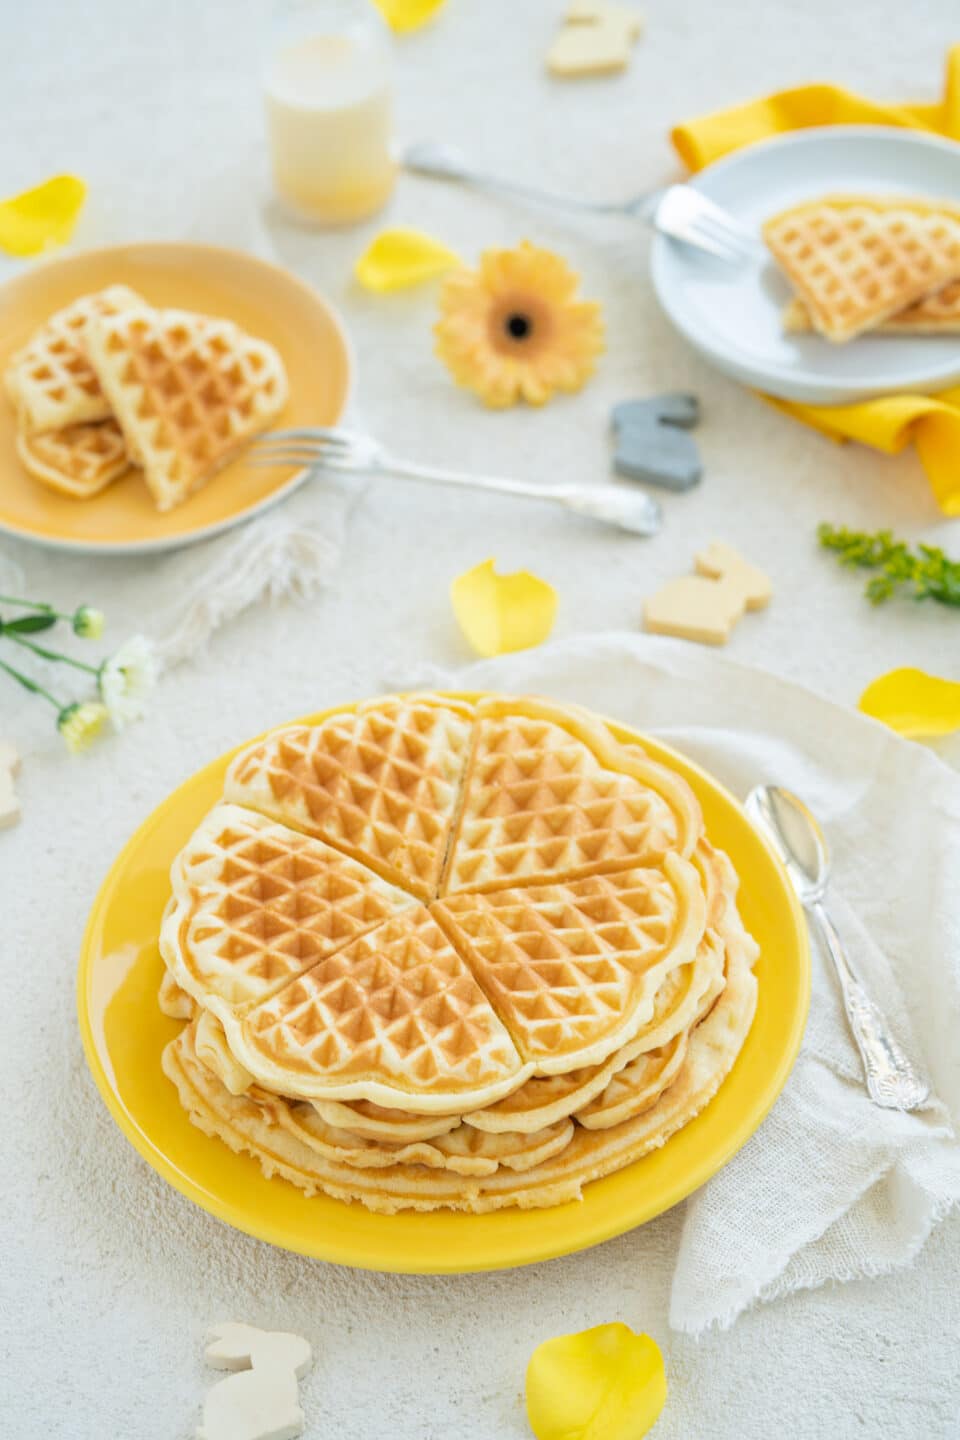 Fluffy Recipe for Easter Waffles